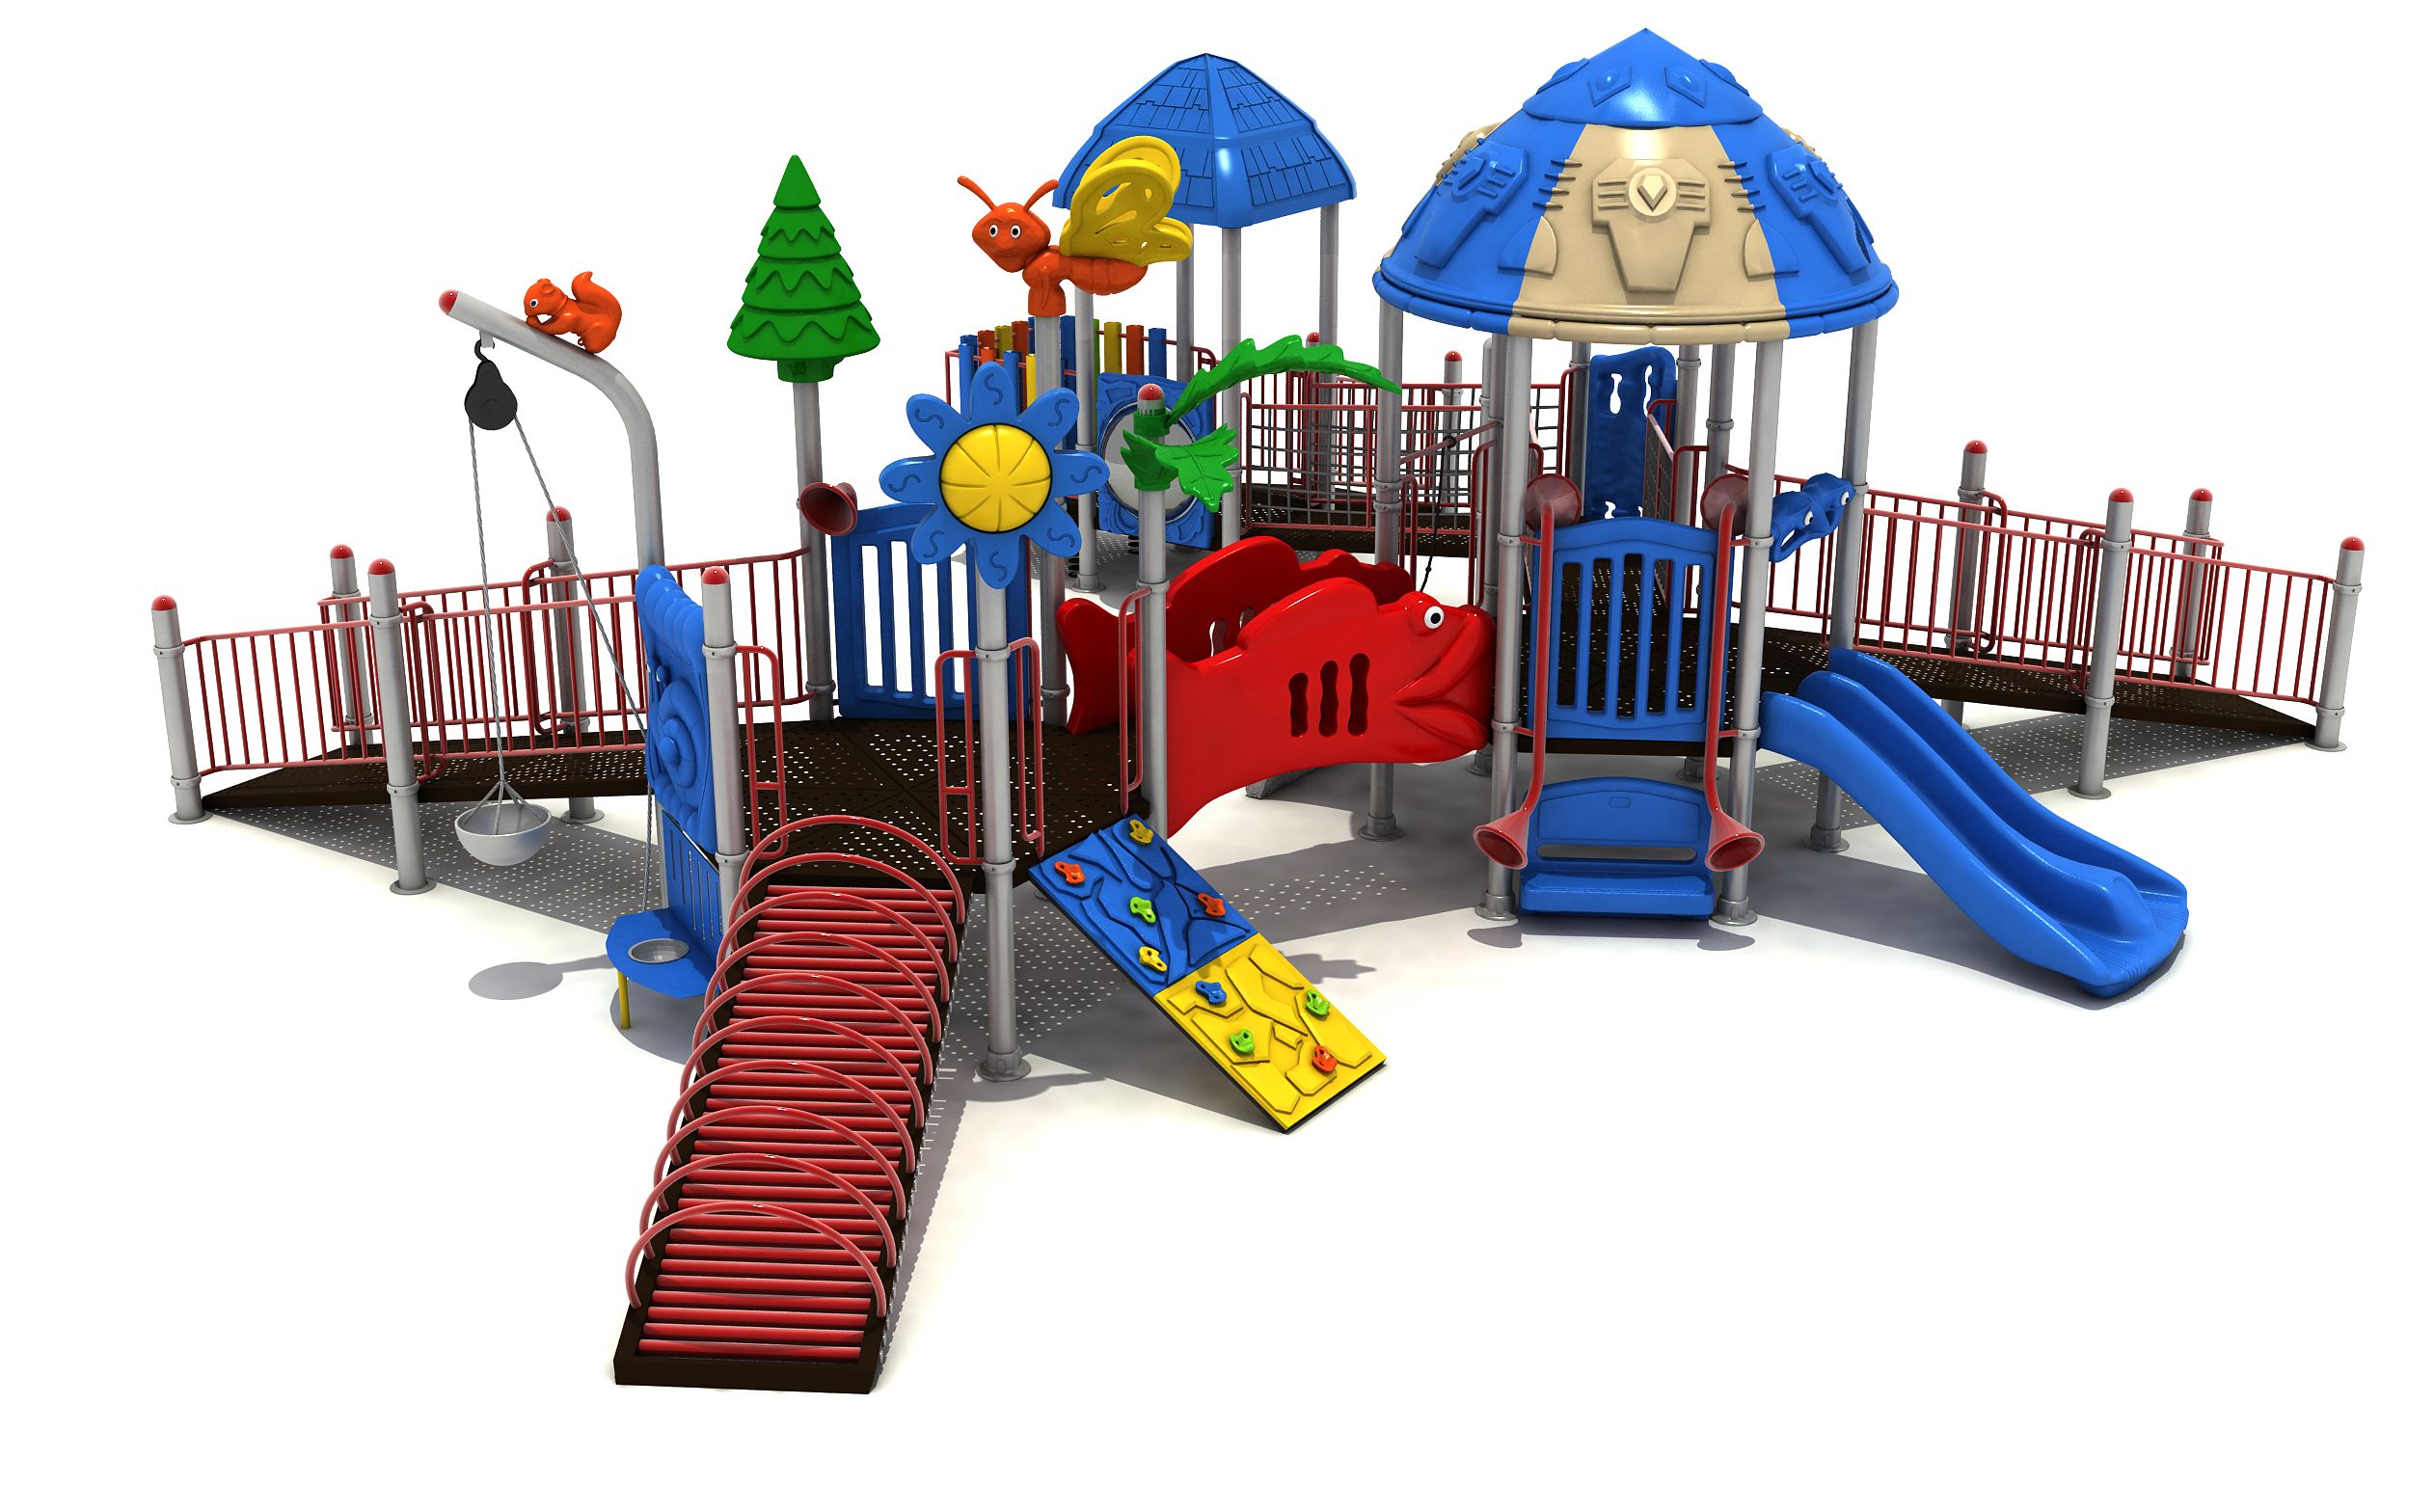 How to Clean Playground Equipment and Keep It Clean？